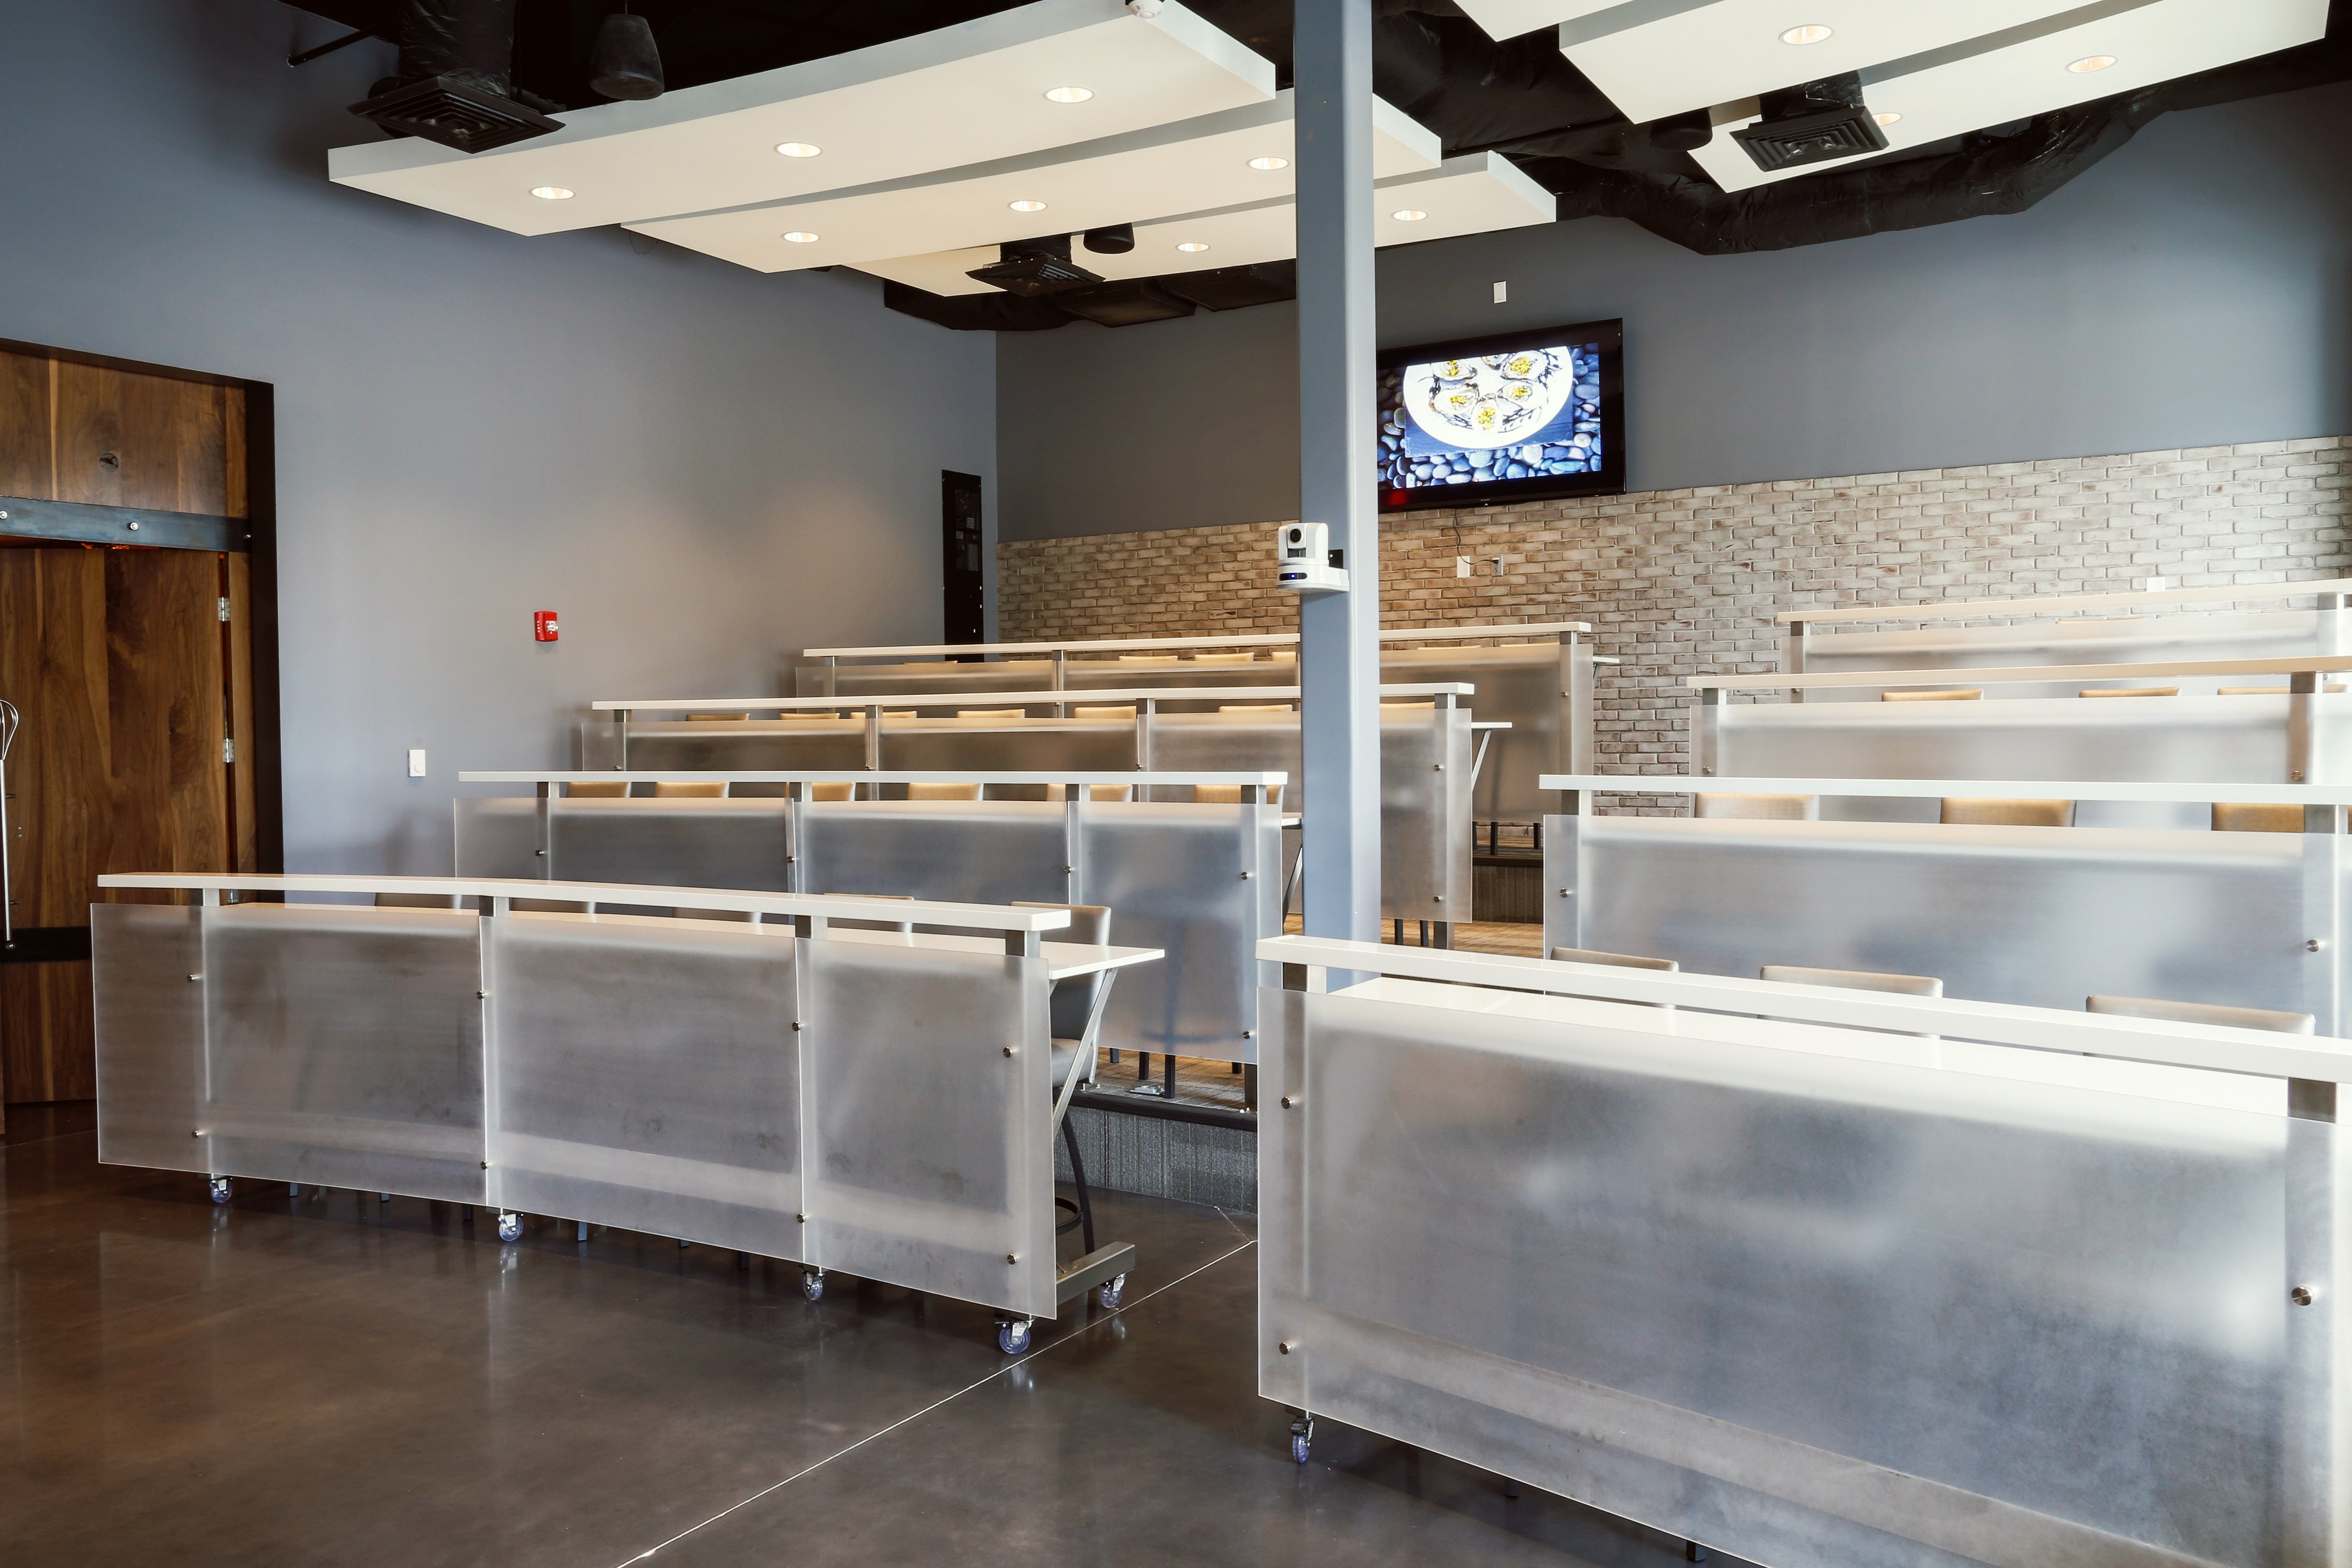 A room with stadium style seating and tables for culinary classes